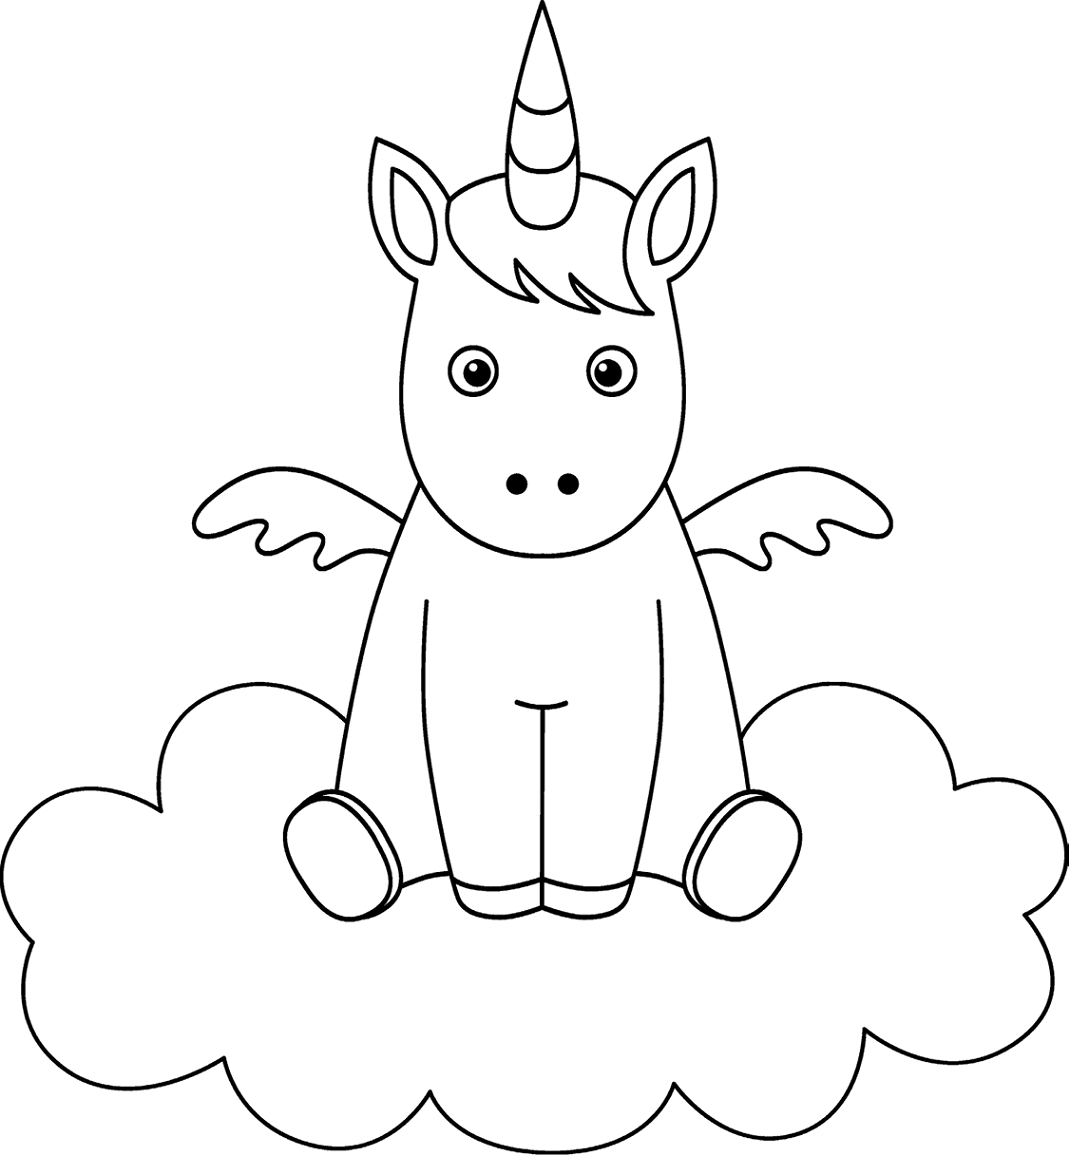 Little Unicorn On Cloud Coloring Page